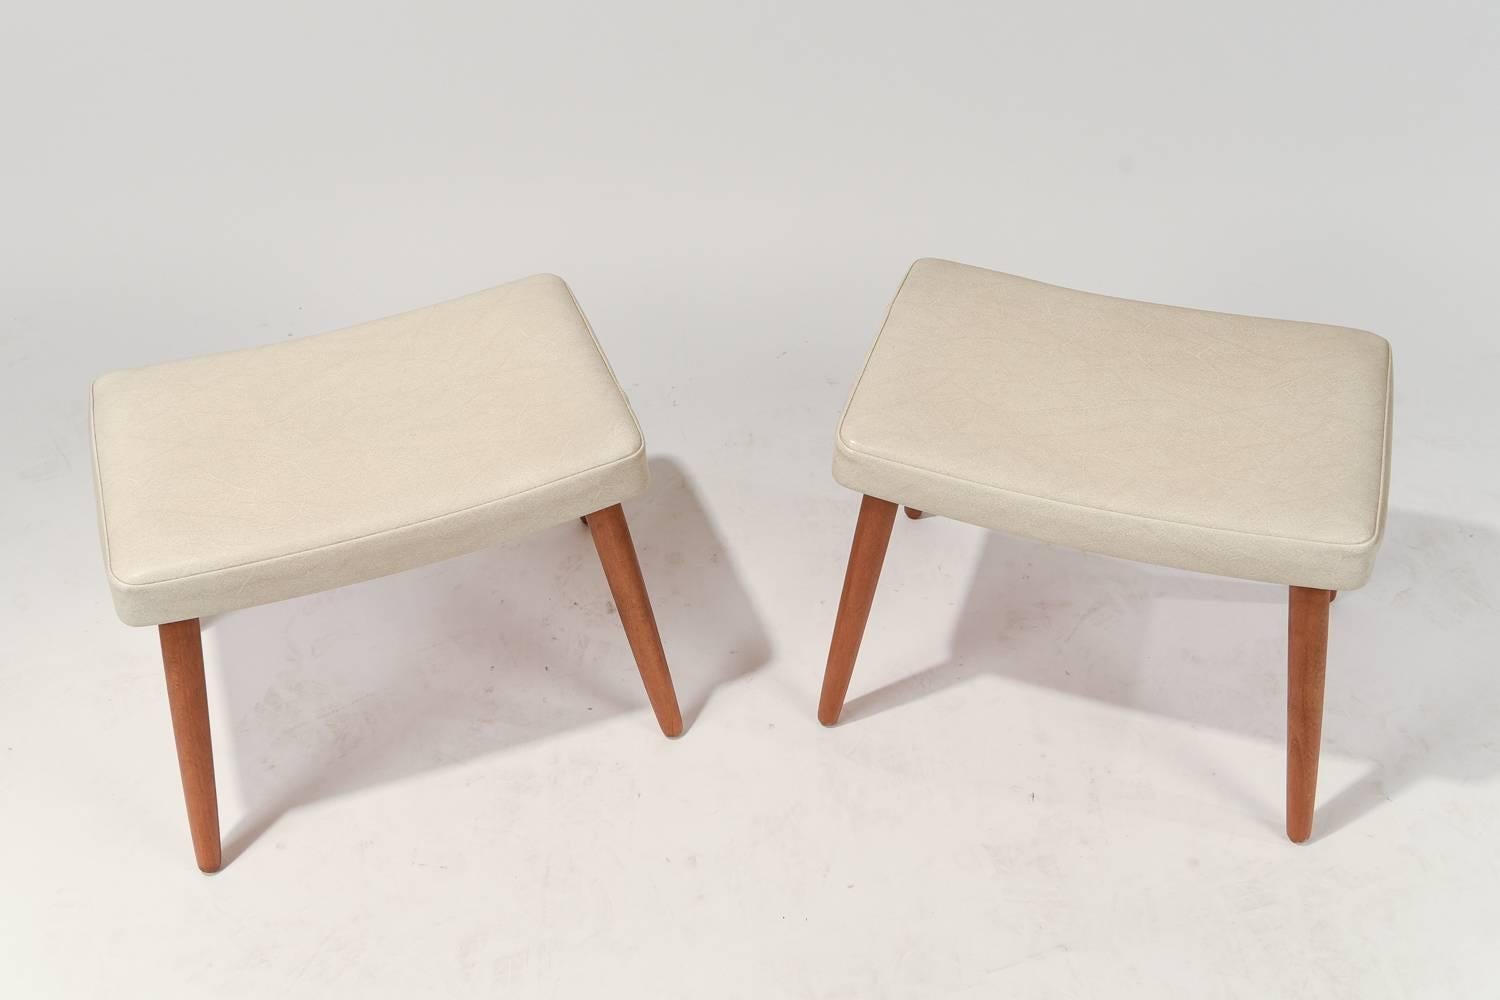 A fantastic pair of Danish Mid-Century stools circa 1960s. Can make great footstools or extra seating when needed.